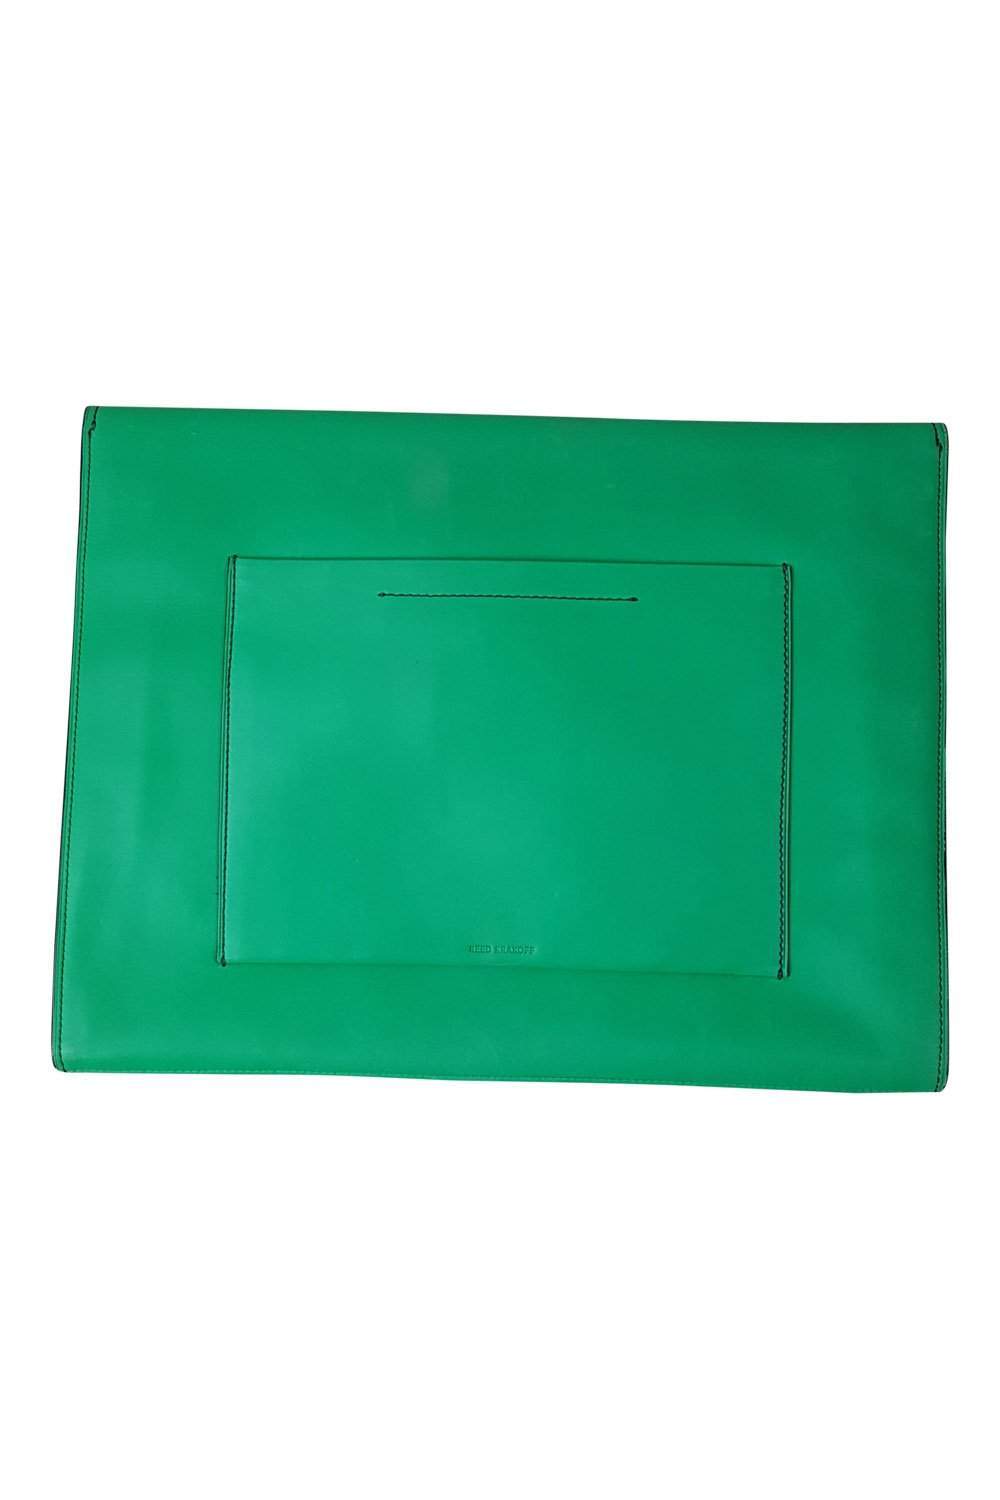 REED KRAKOFF Large Green leather Clutch Bag-Reed Krakoff-The Freperie